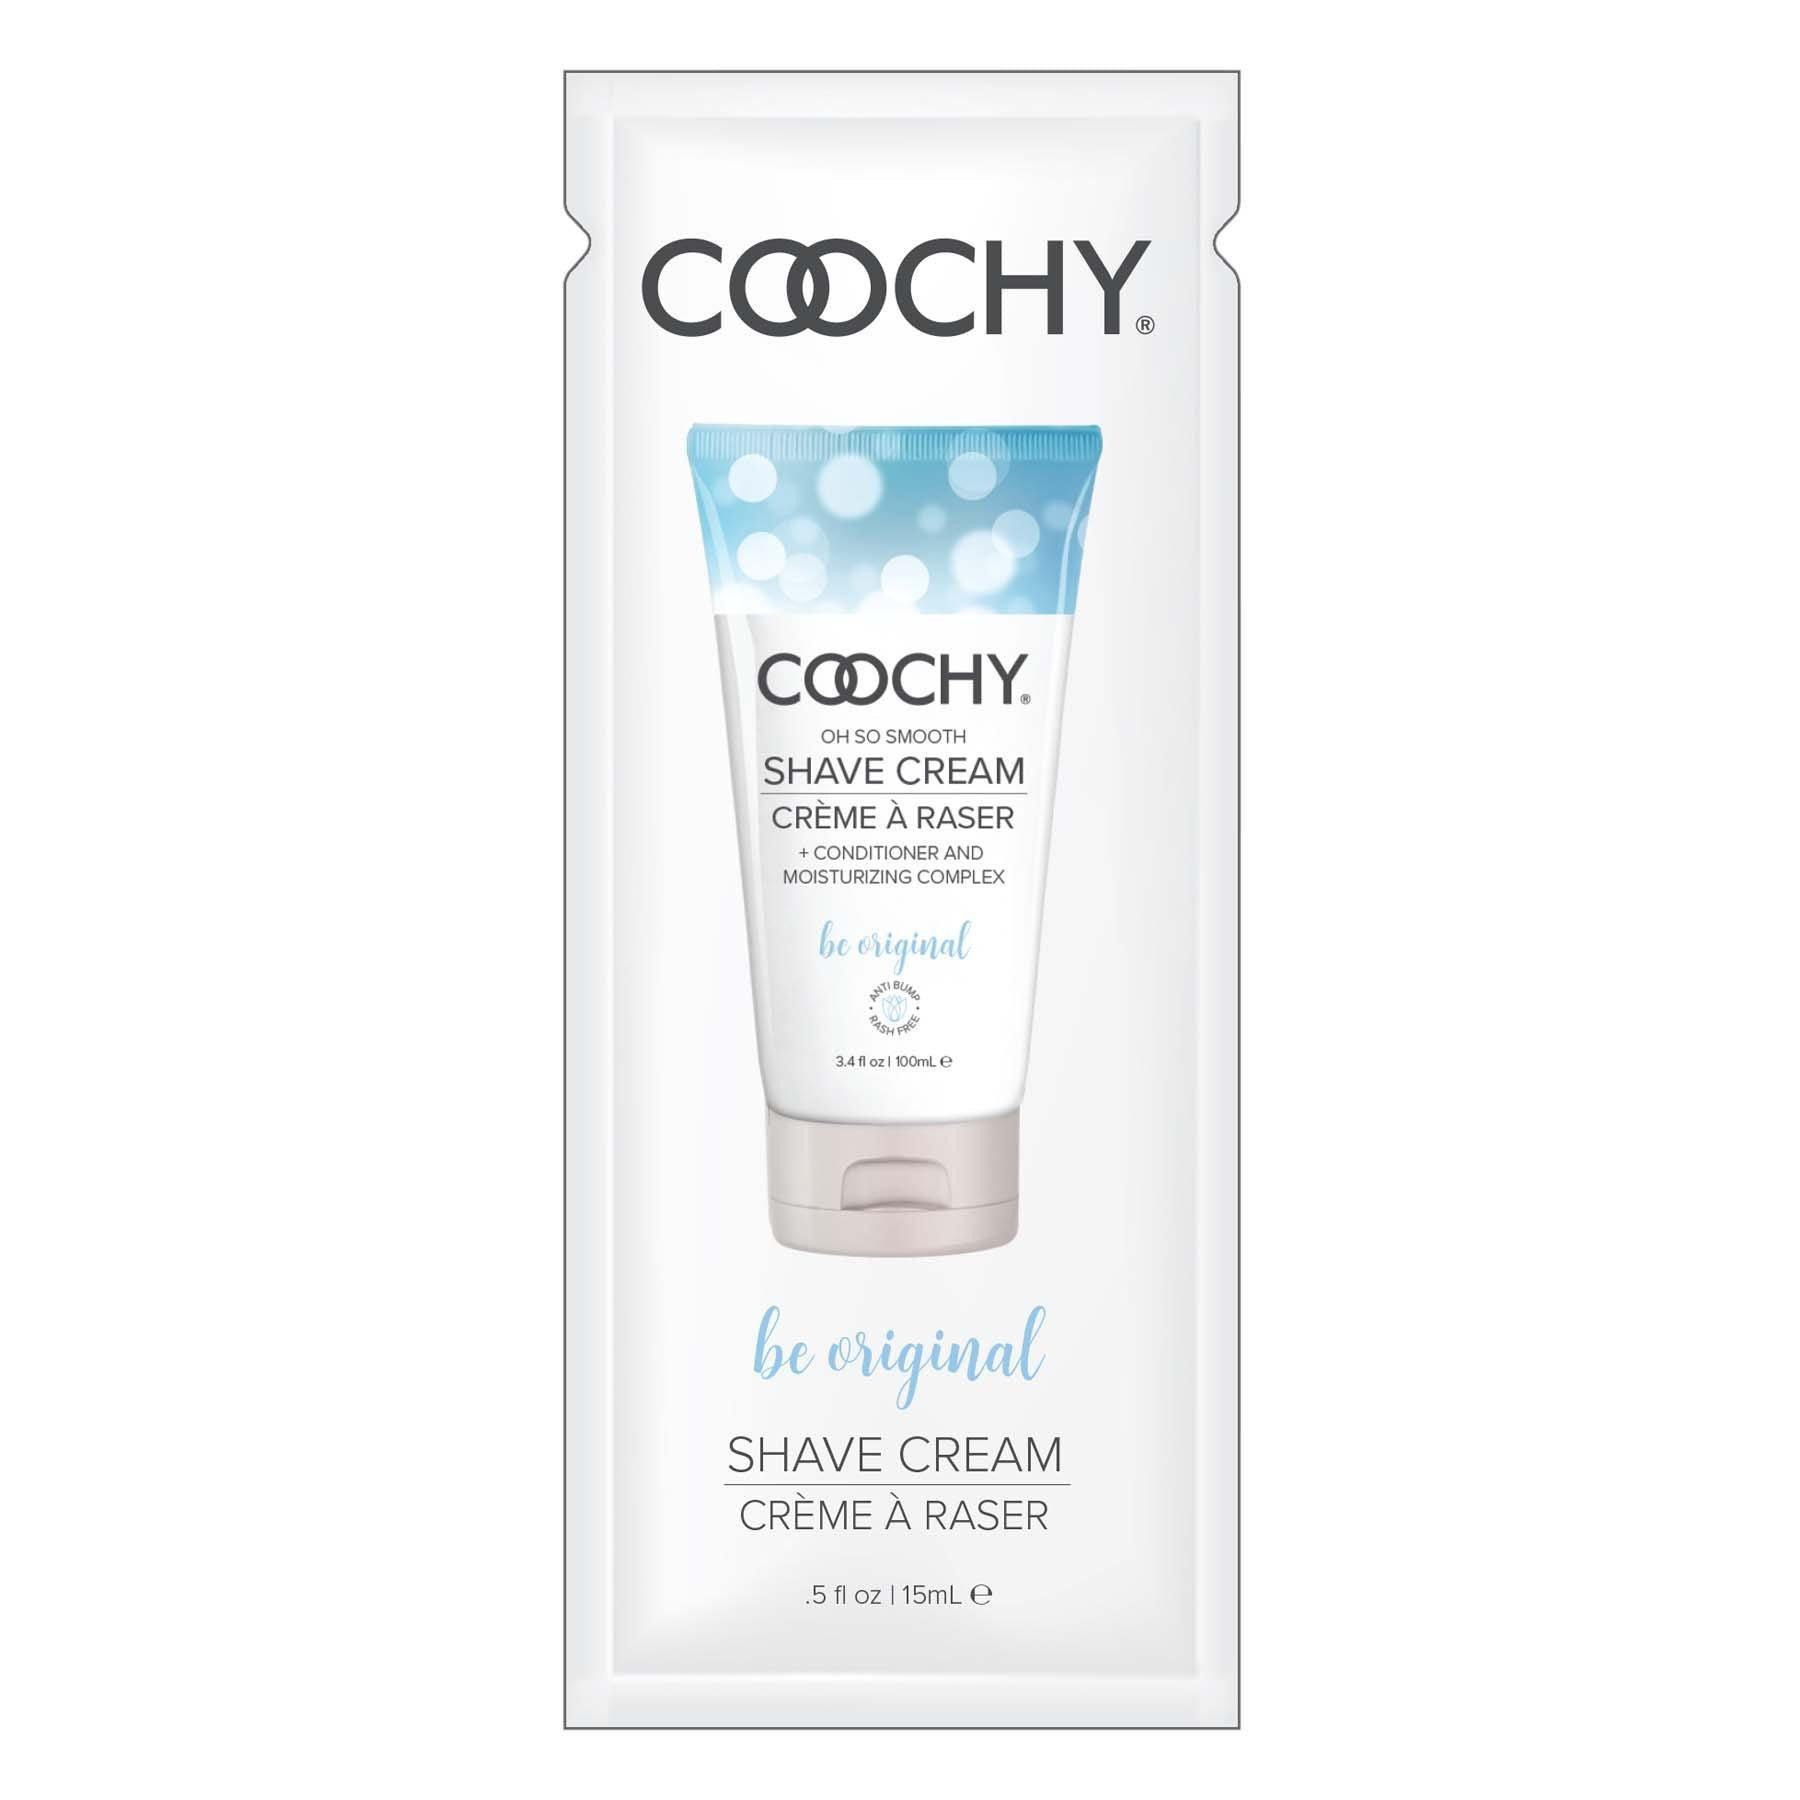 Coochy Shave Cream - Be Original - 15 ml Foils 24 Count Display - My Sex Toy Hub